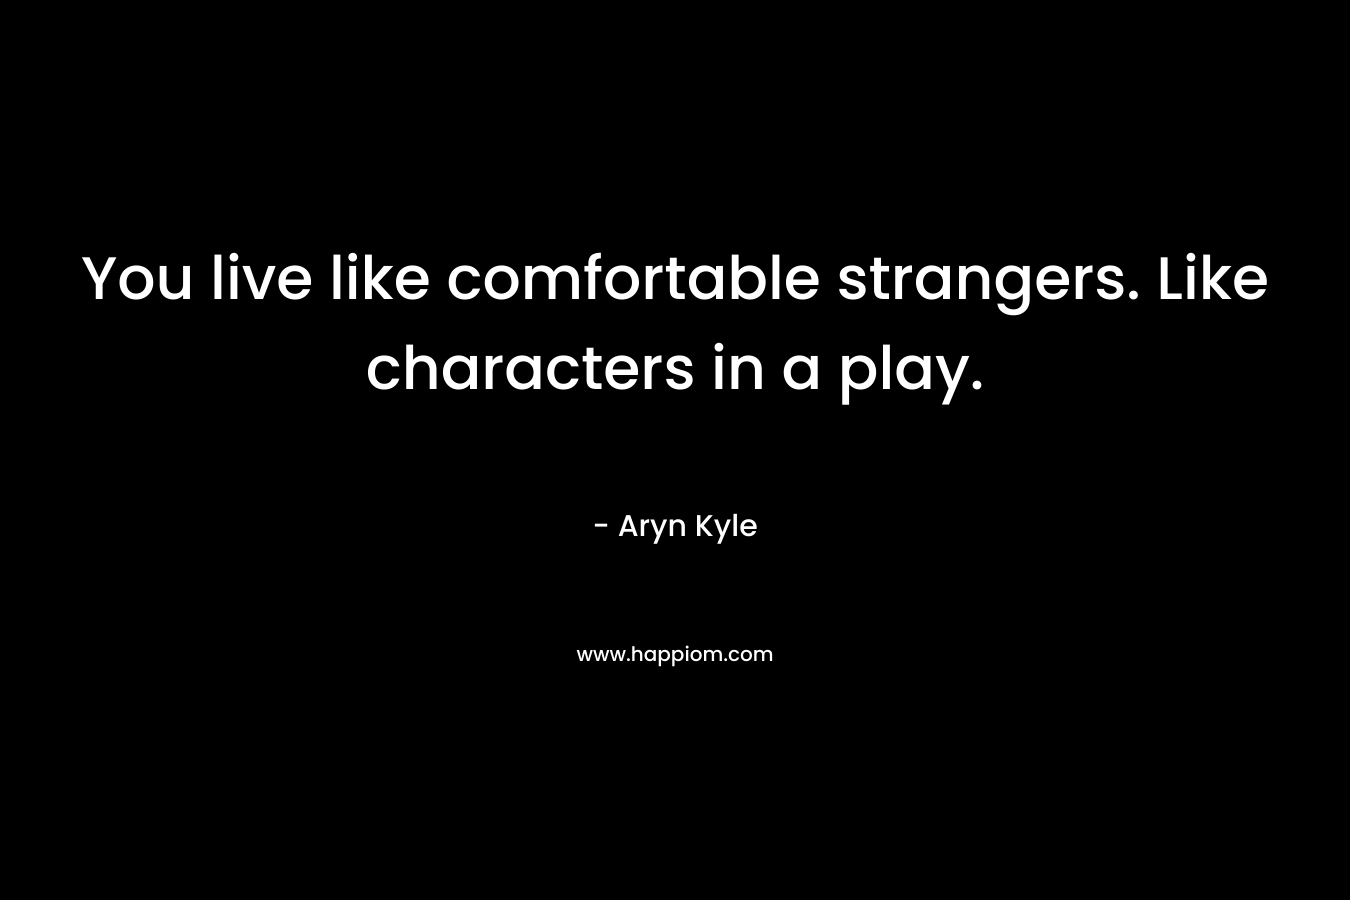 You live like comfortable strangers. Like characters in a play. – Aryn Kyle